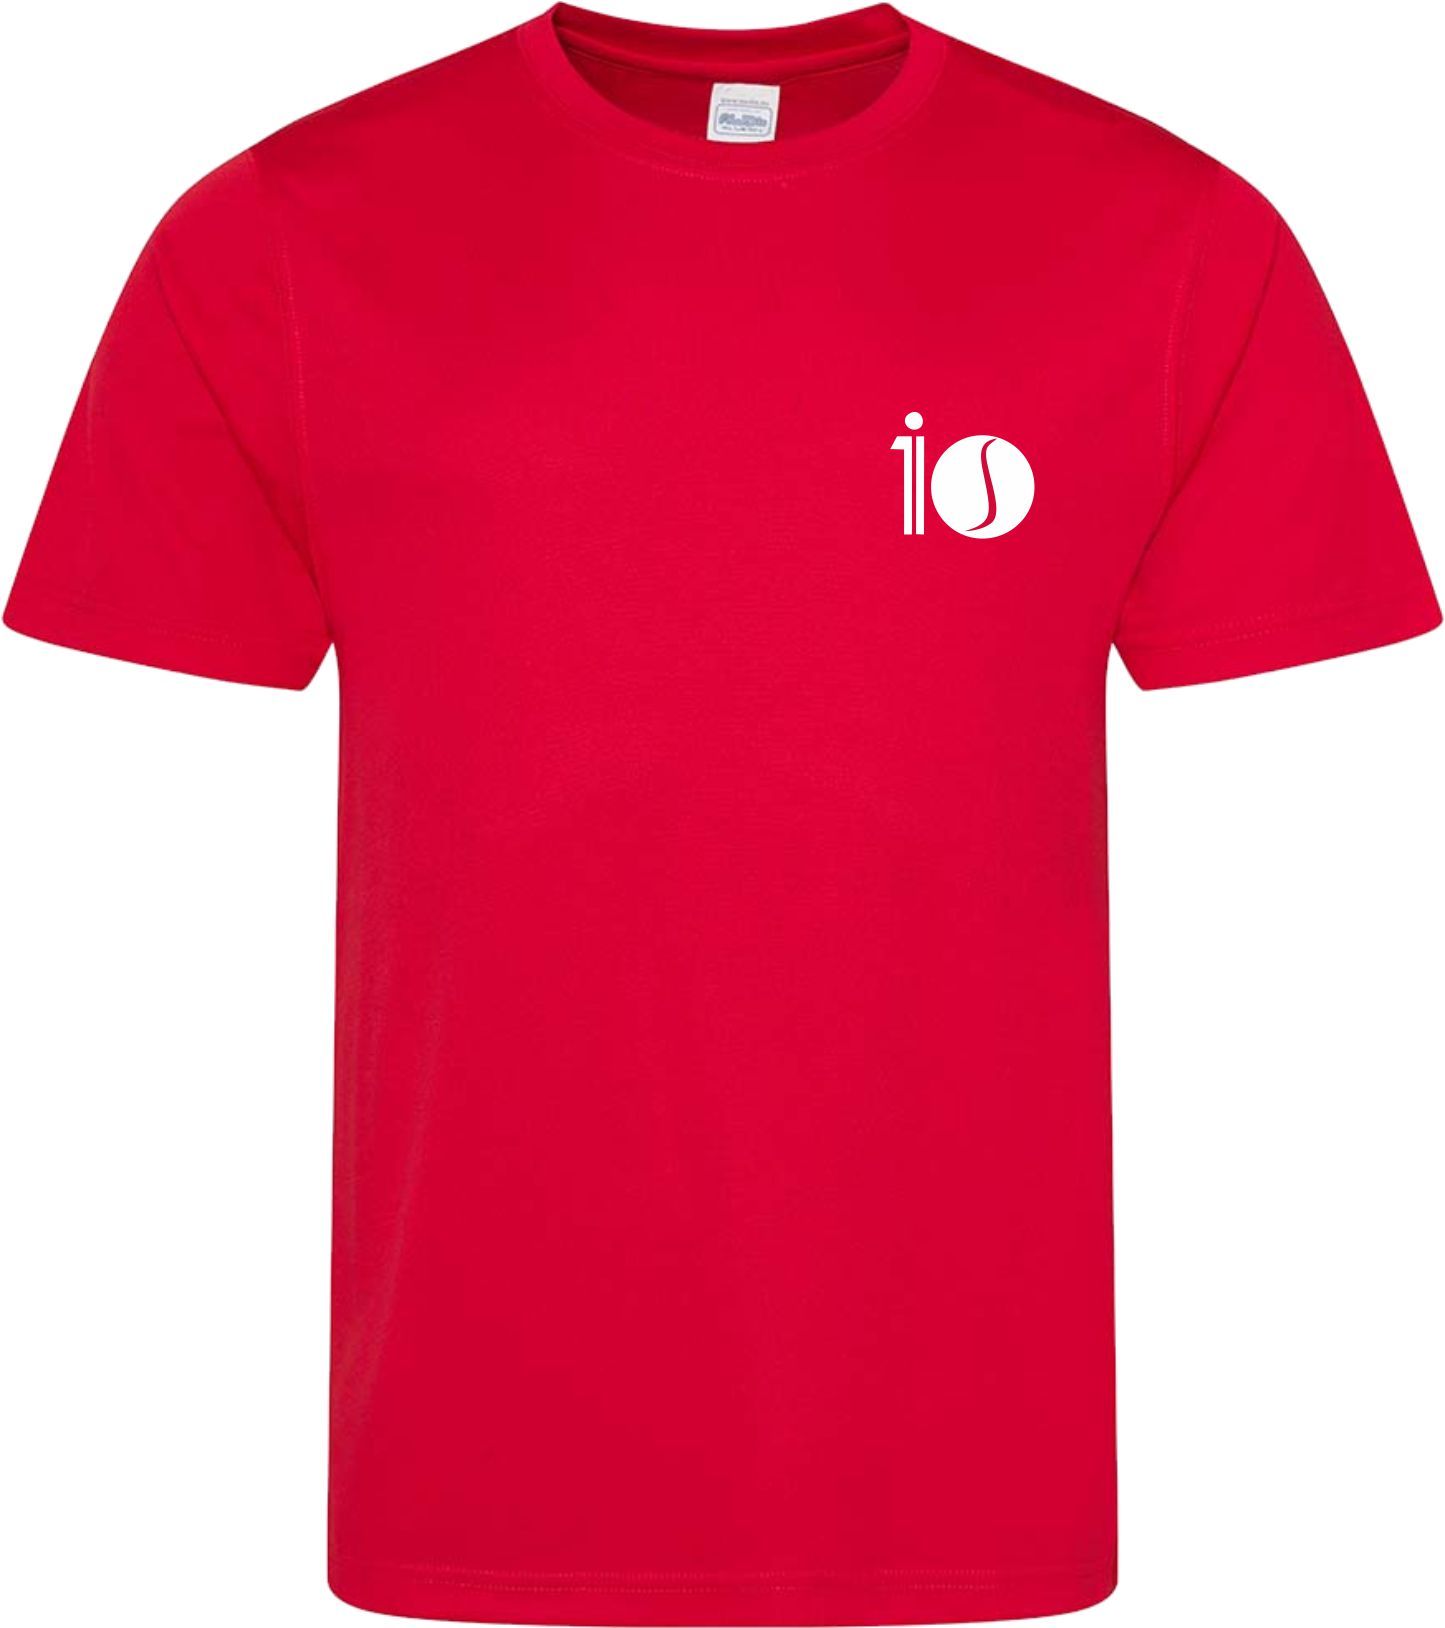 Coaching Staff - 10is Academy Coach Cool T (Unisex)